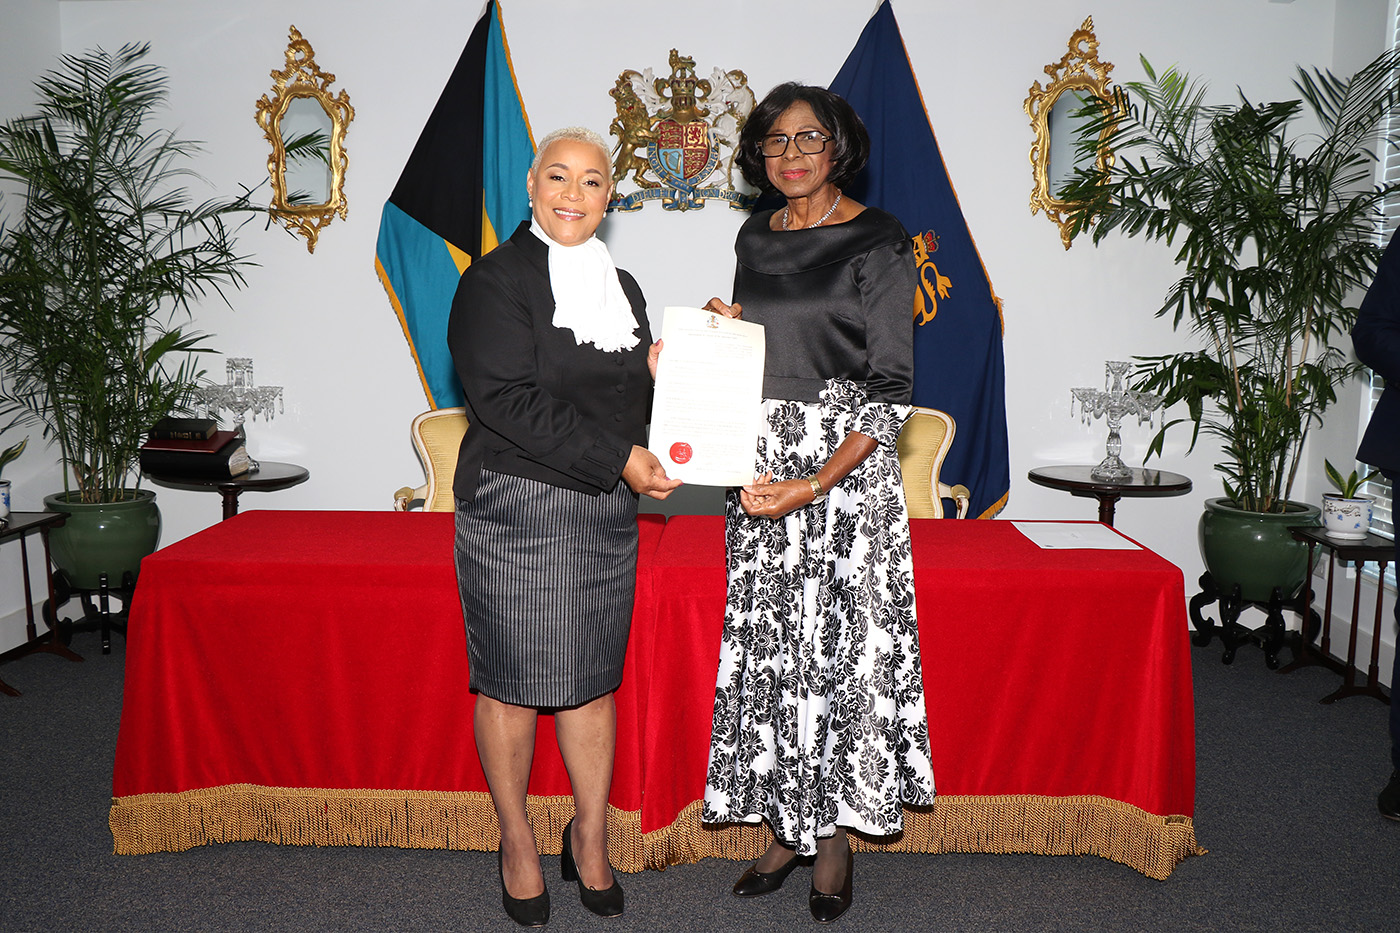 Hope Strachan sworn in as Justice of the Supreme Court - ZNS BAHAMAS